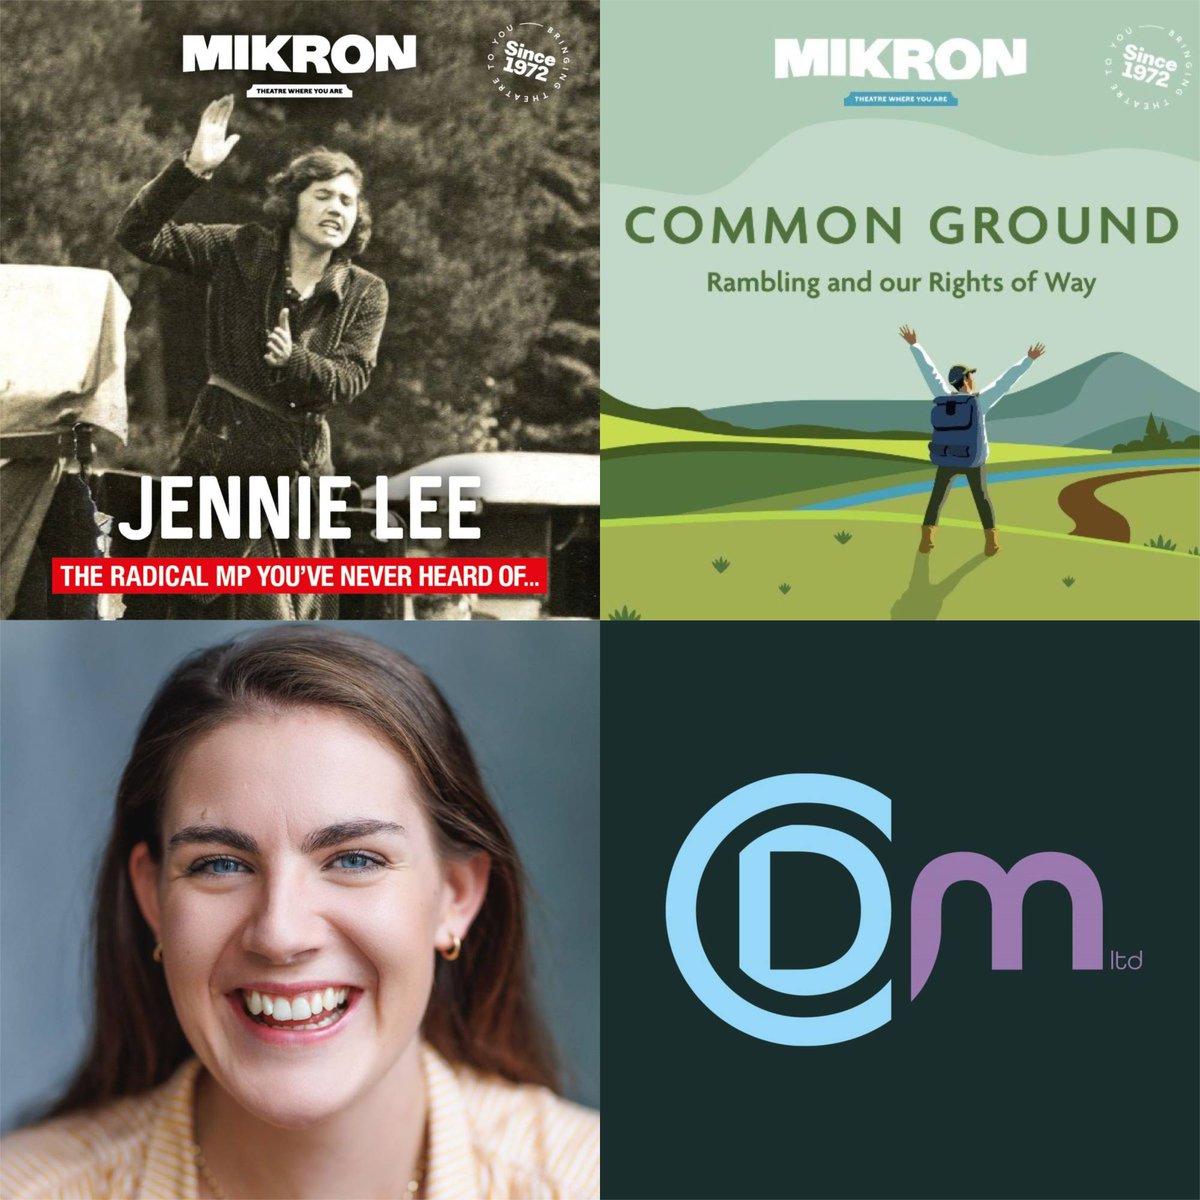 Break a leg to client GEORGINA LILEY (@GeorginaLiley) who opens in Mikron Theatre Company's 2024 UK Tour of plays Jennie Lee and Common Ground. Georgina will be touring the plays in rep until 19 October. @mikrontheatre